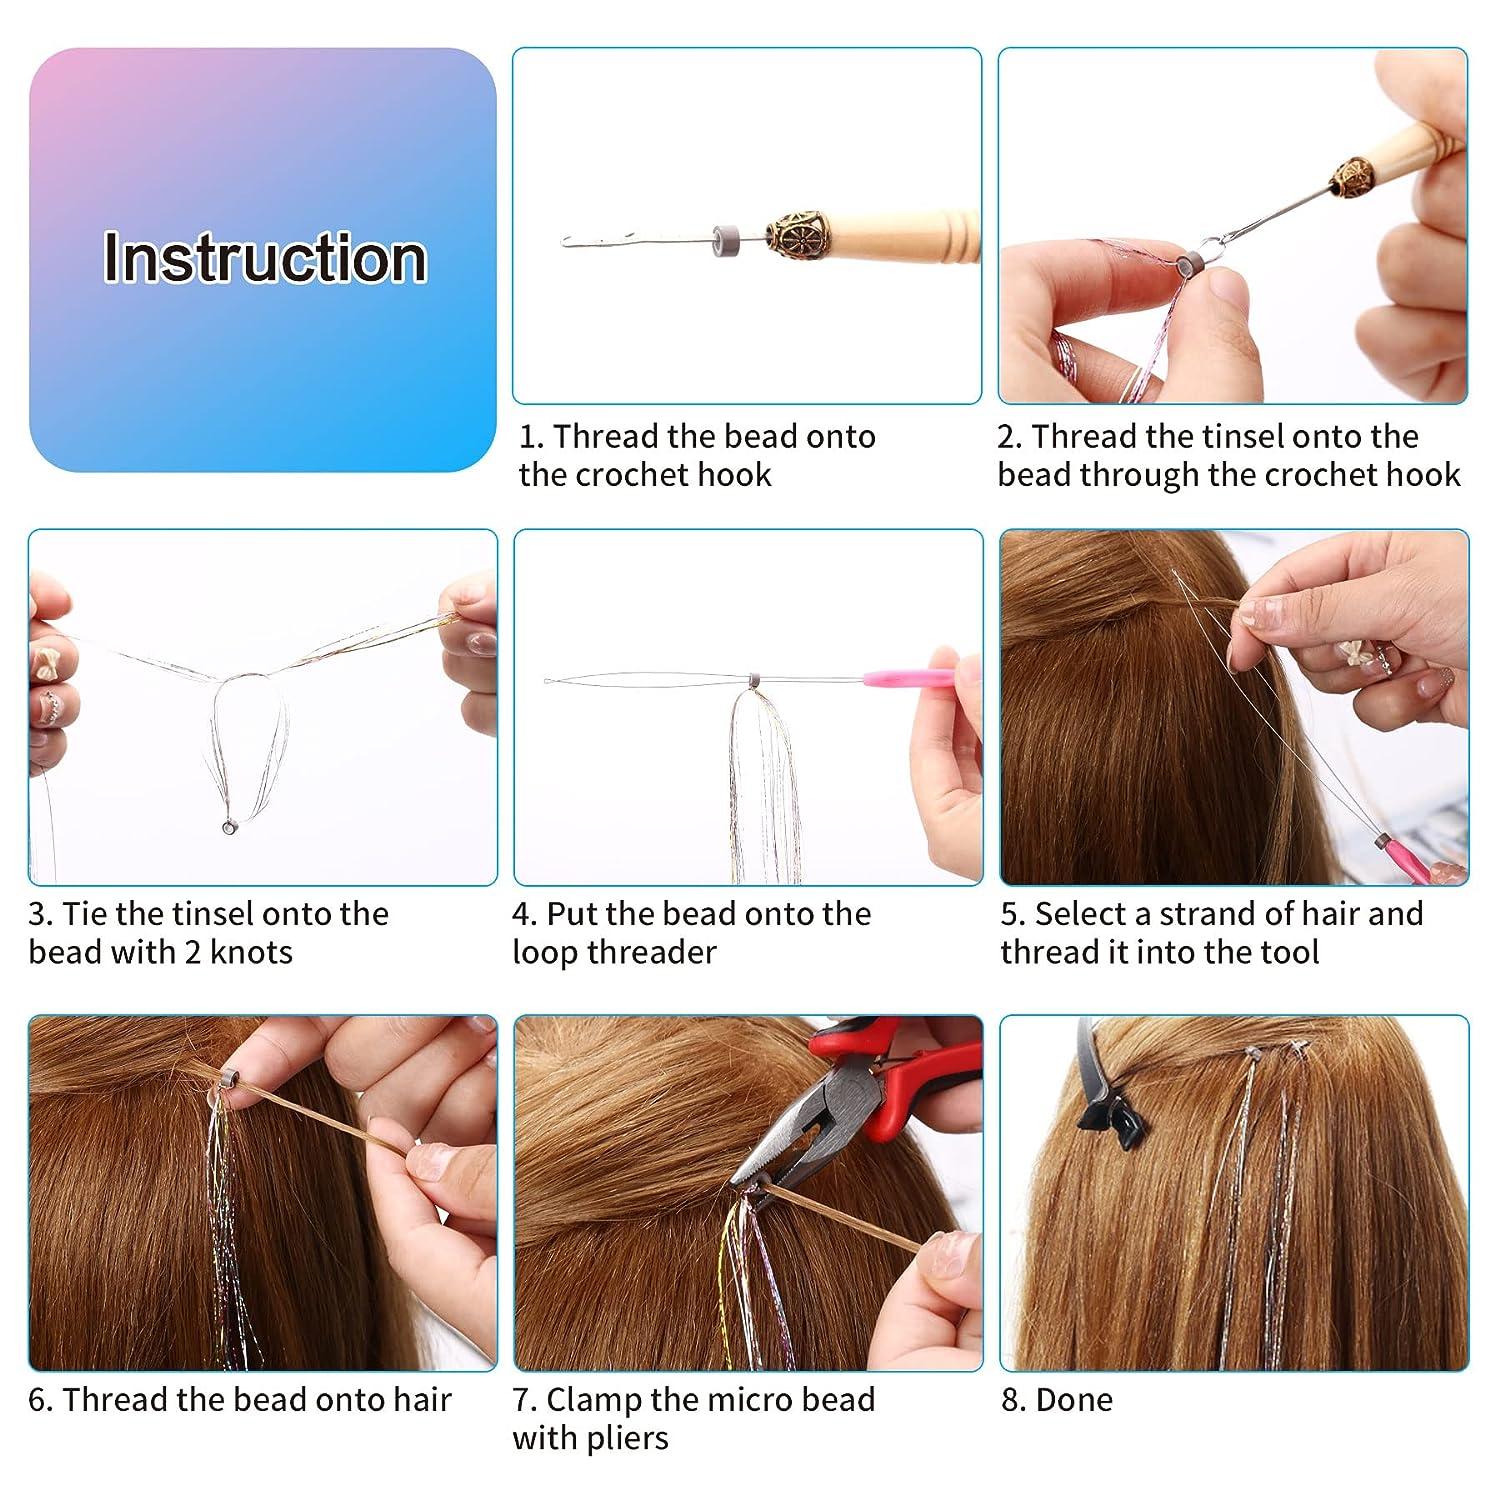 How To Apply Hair Tinsel With Micro Beads